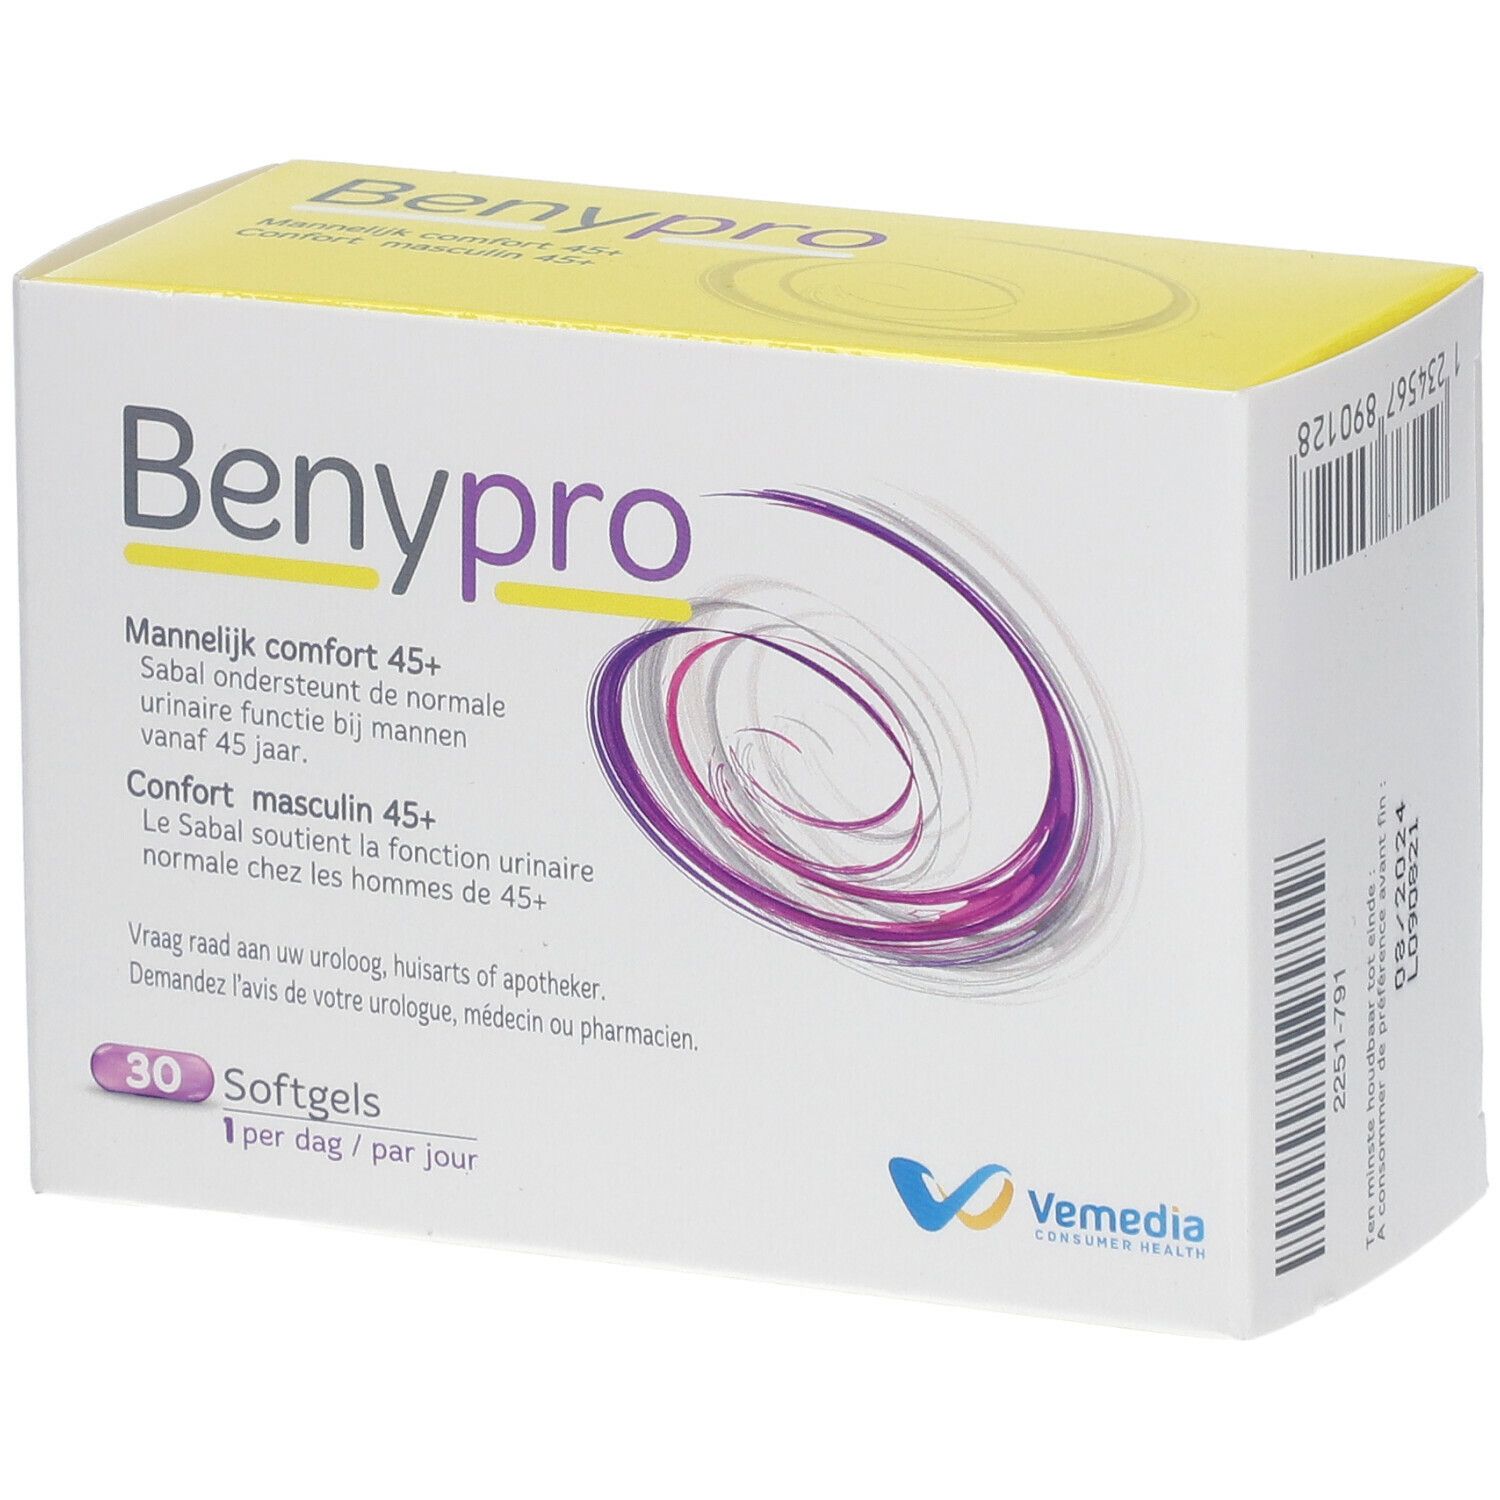 Benypro Confort masculin 45+